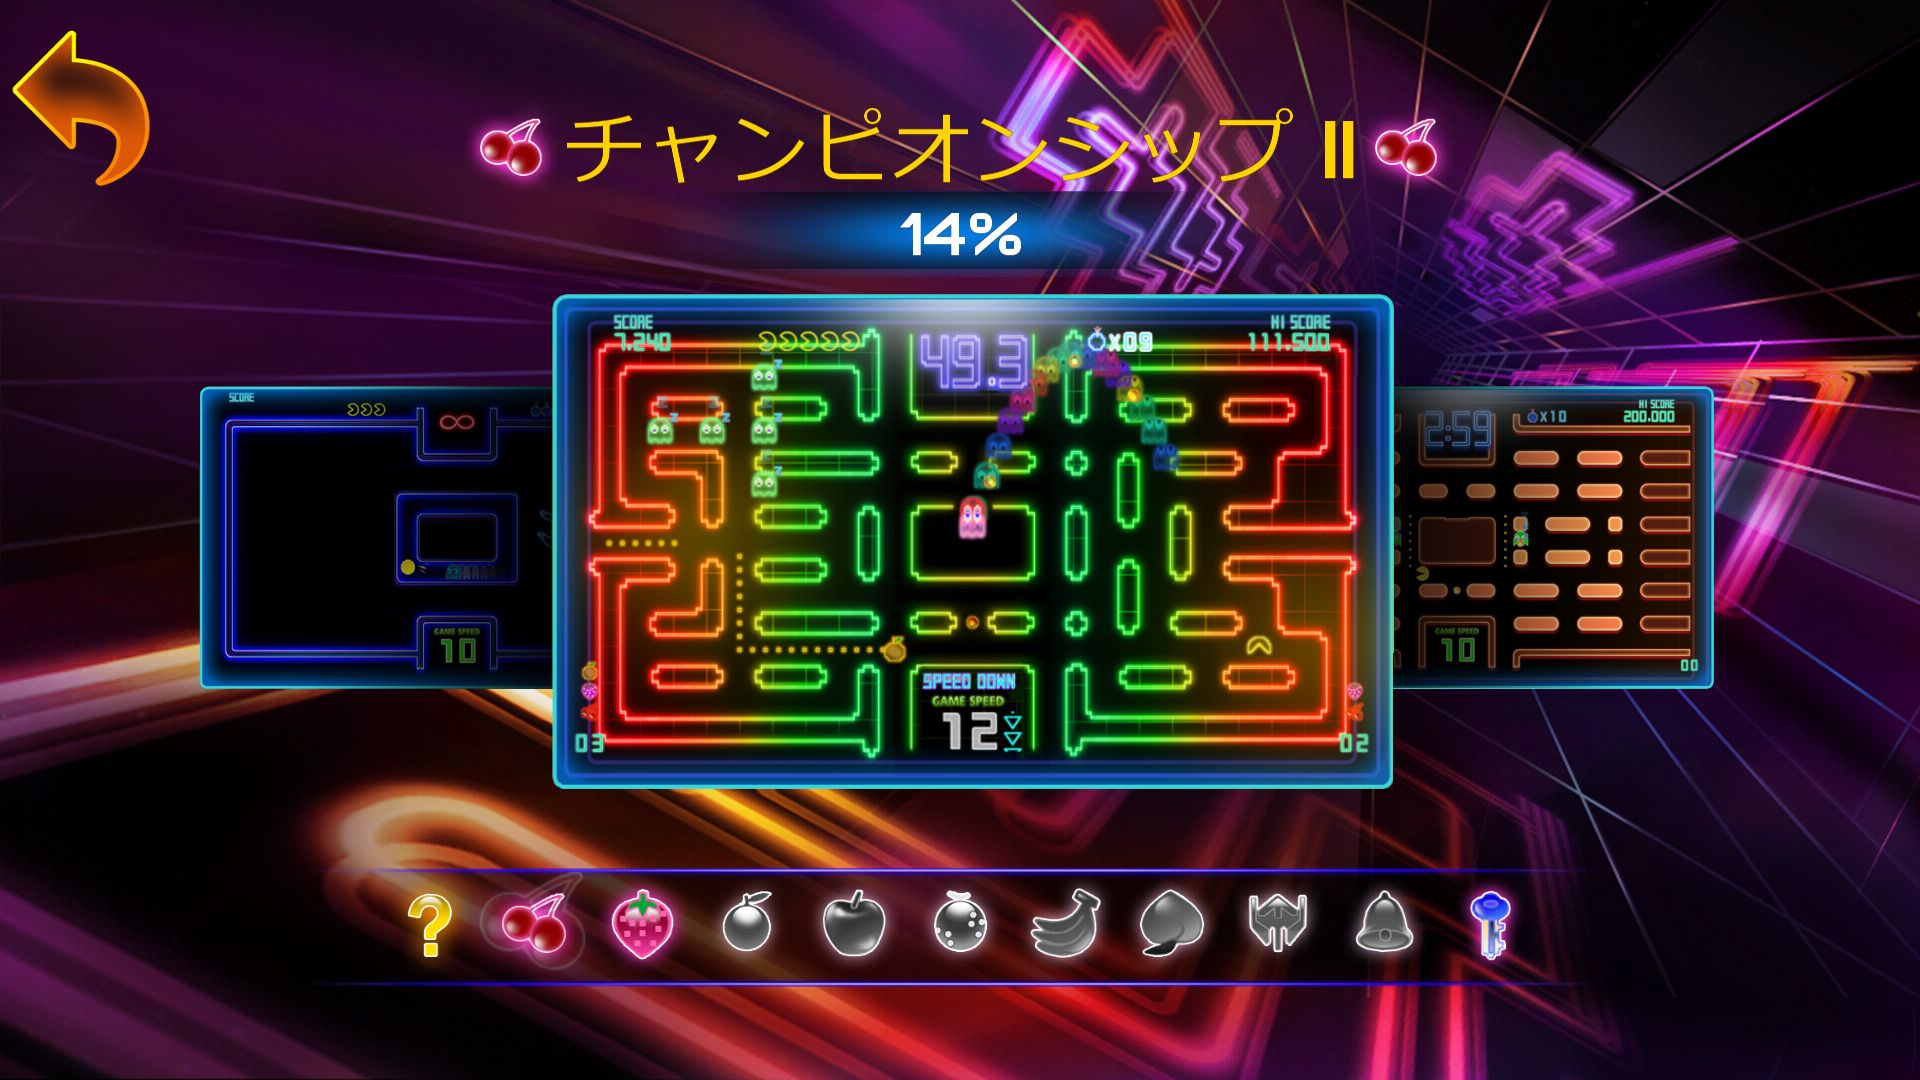 PAC-MAN CE DX androidアプリスクリーンショット2